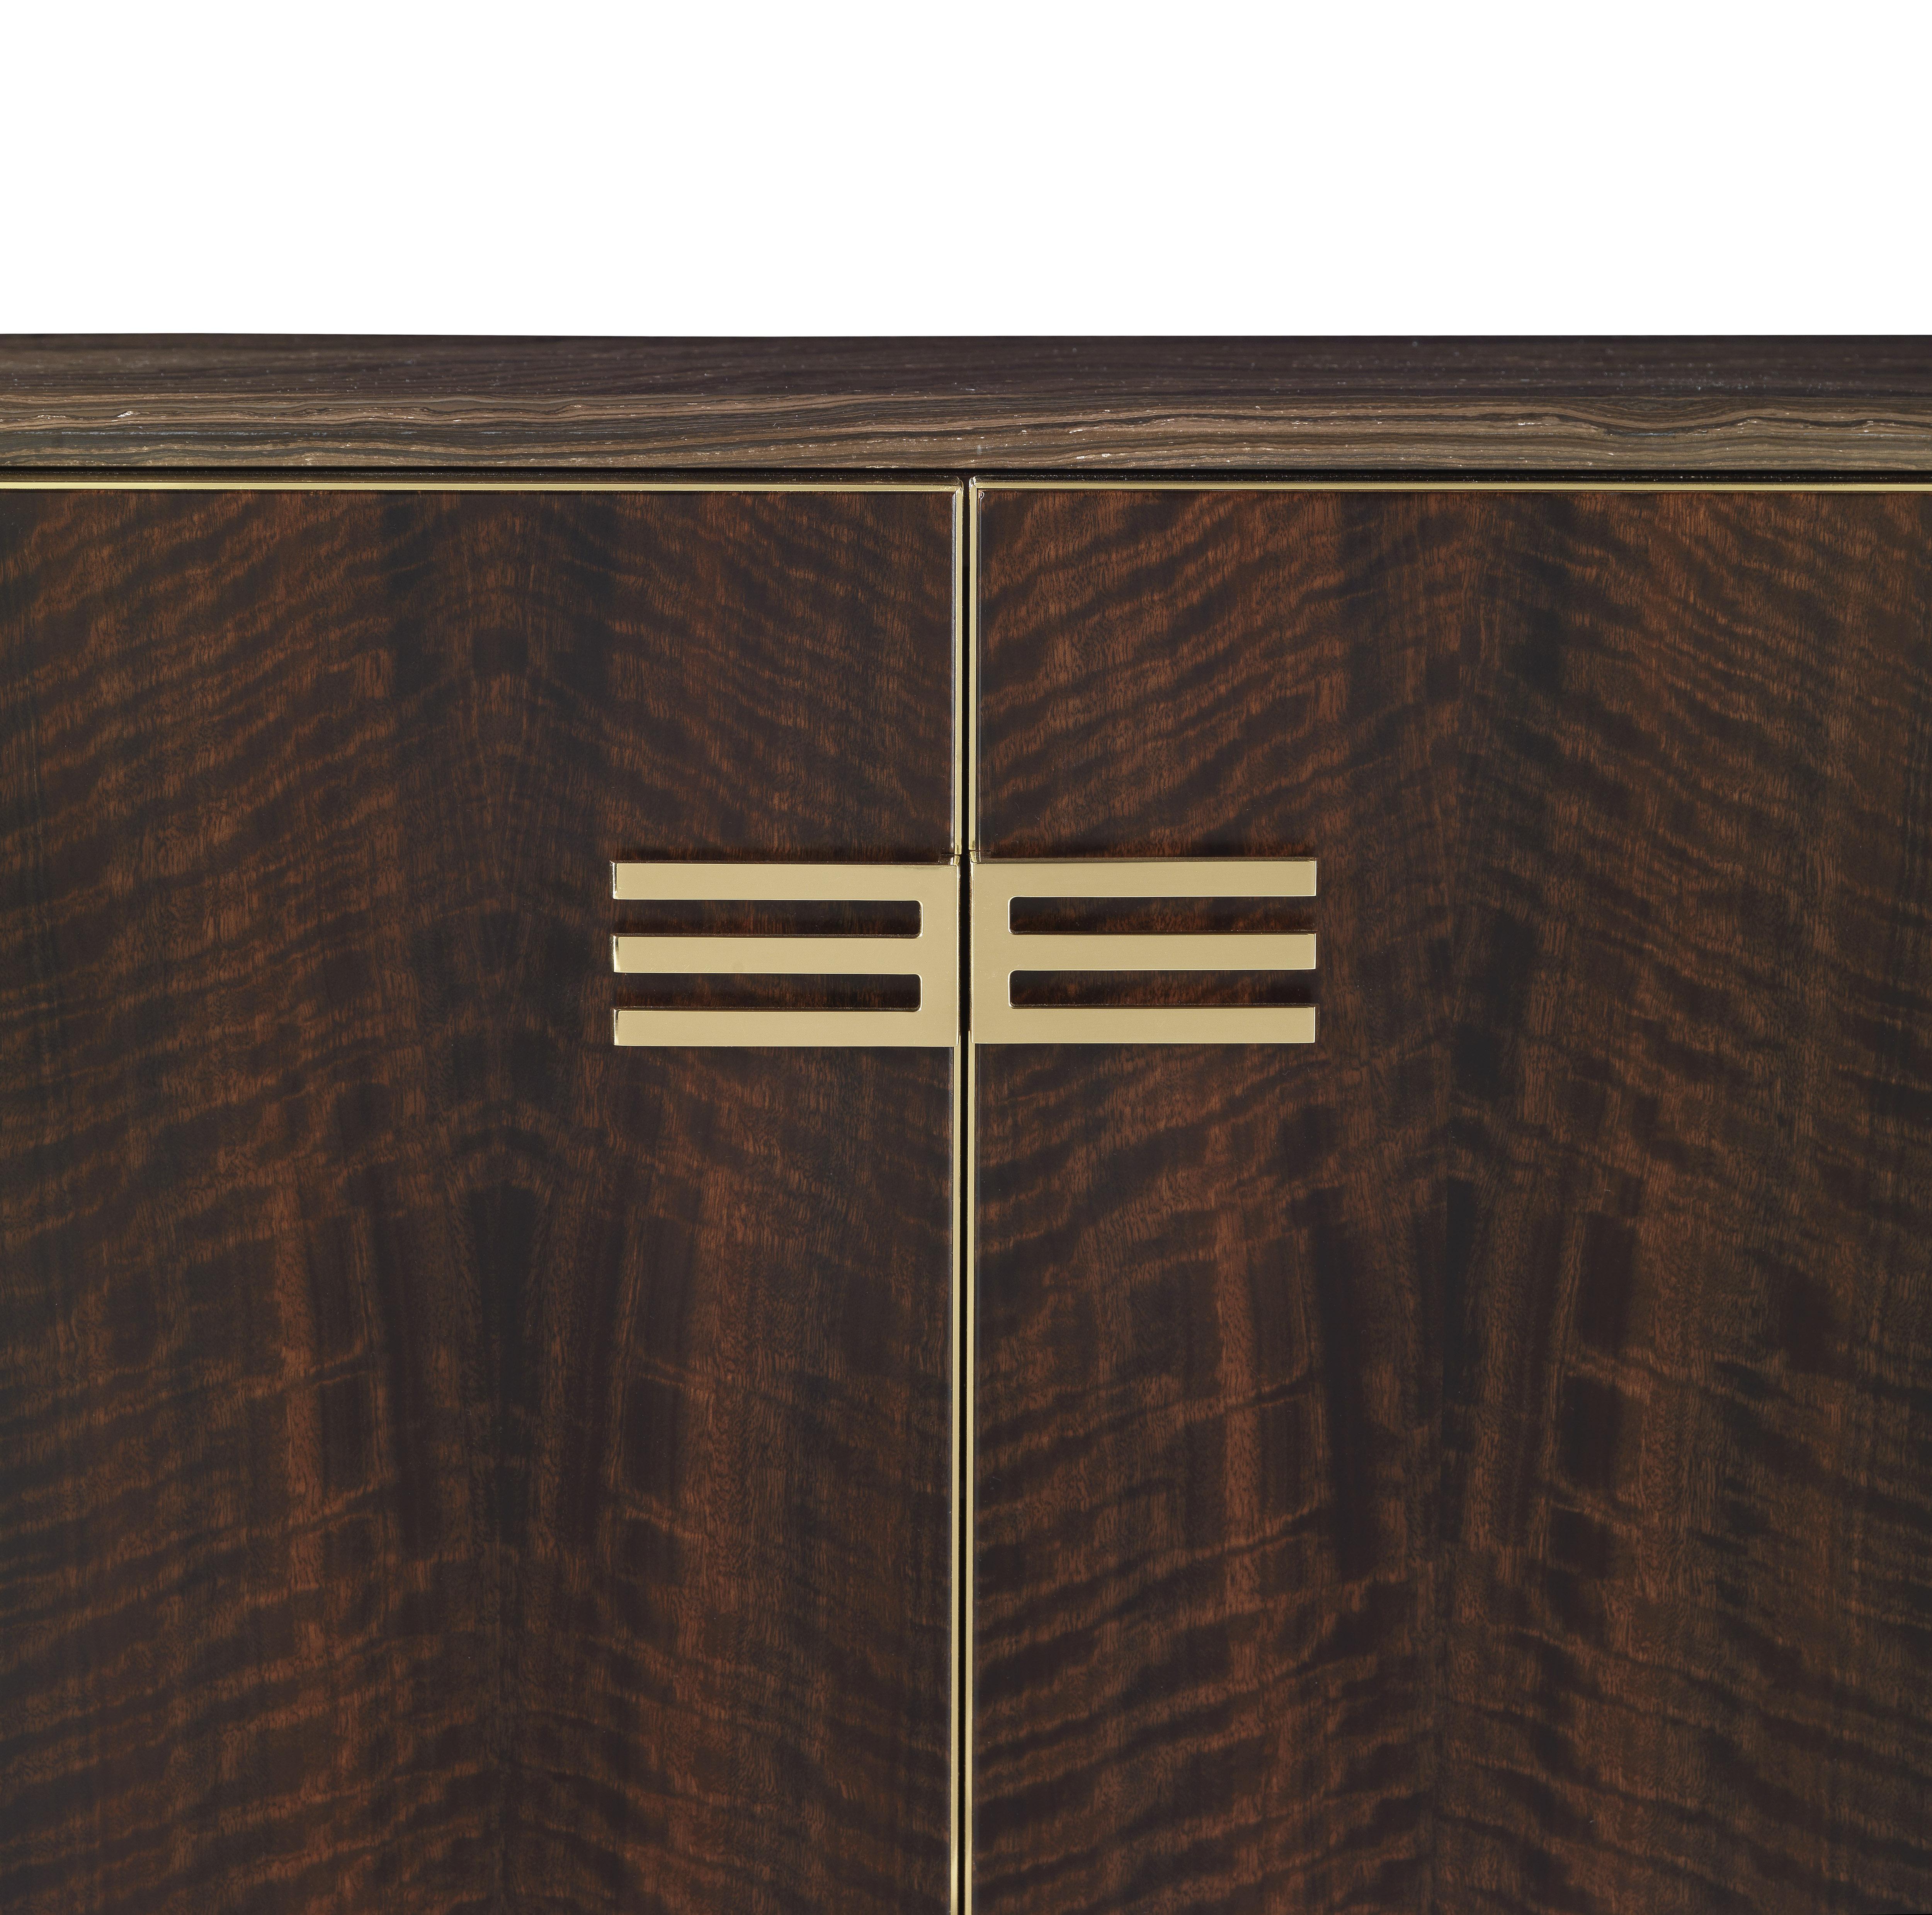 Patinated 21st Century Klee Sideboard in Wood with Marble Top by Etro Home Interiors For Sale